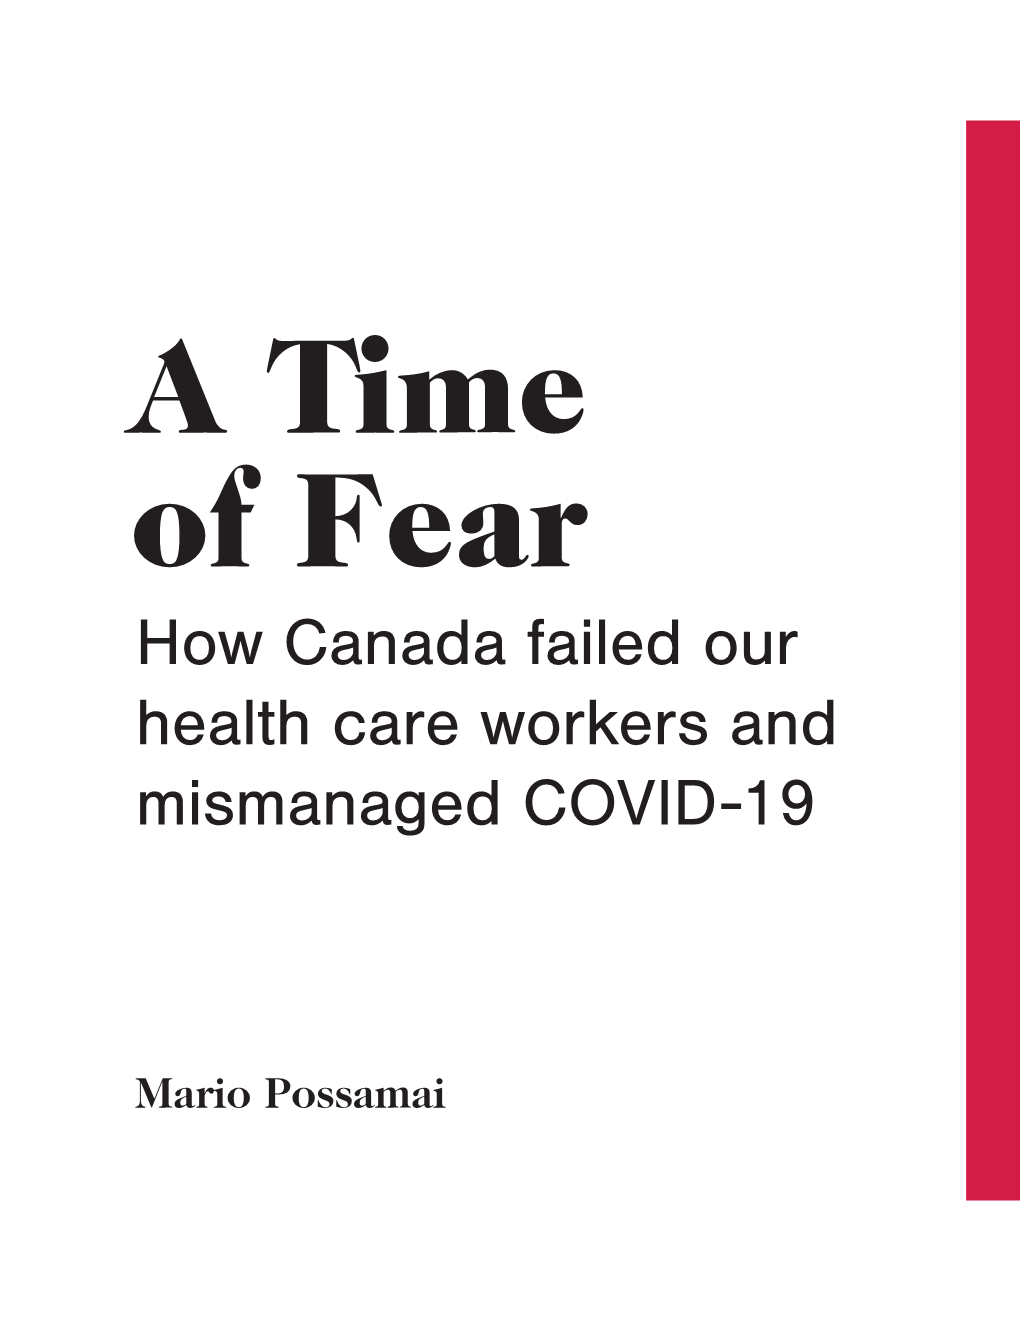 How Canada Failed Our Health Care Workers and Mismanaged COVID-19